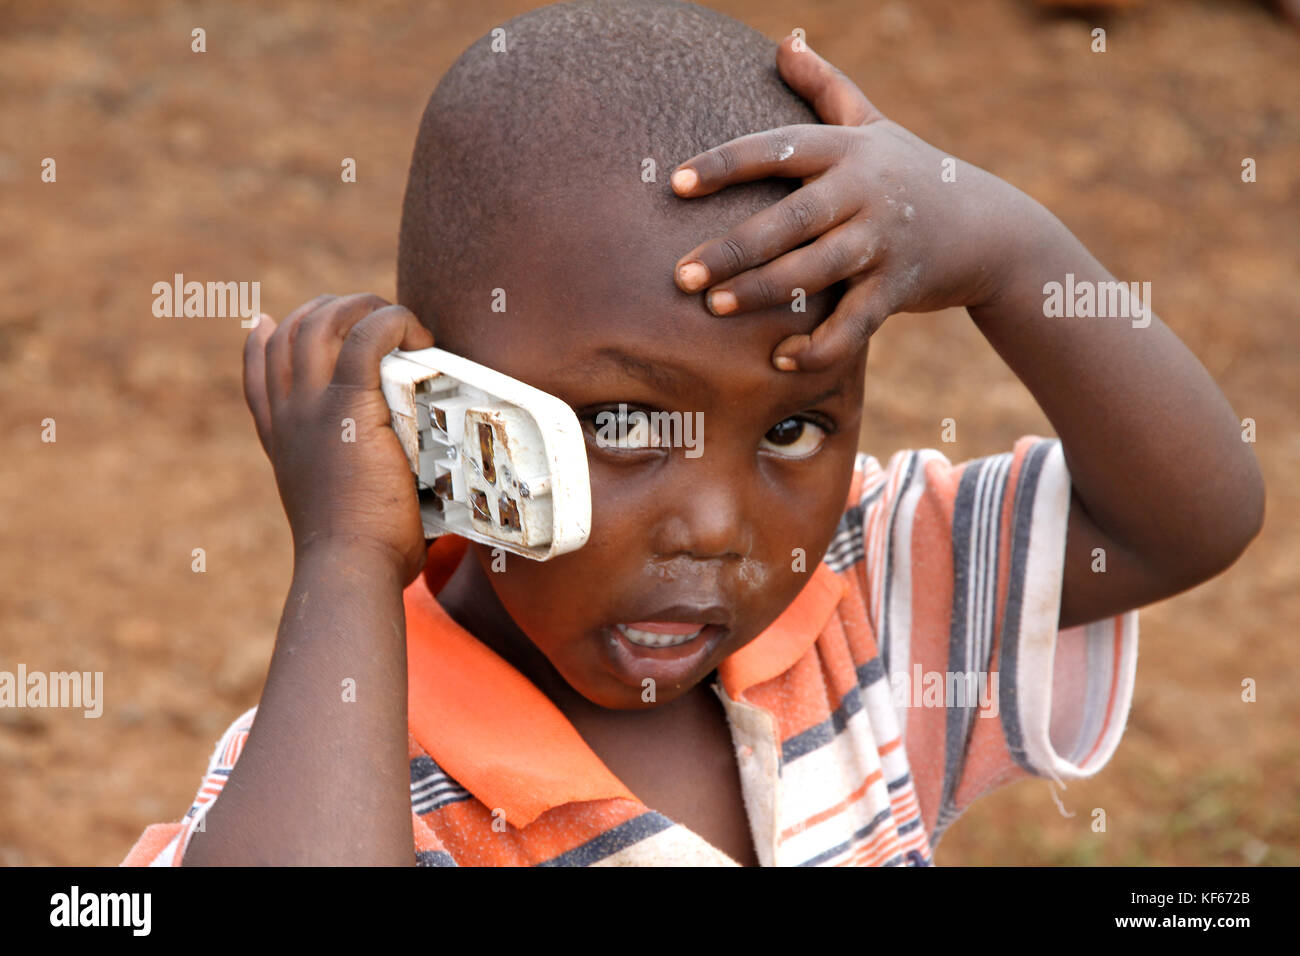 Living in the Kenya Slum Aerias - Young kid playing with broken phone Stock Photo